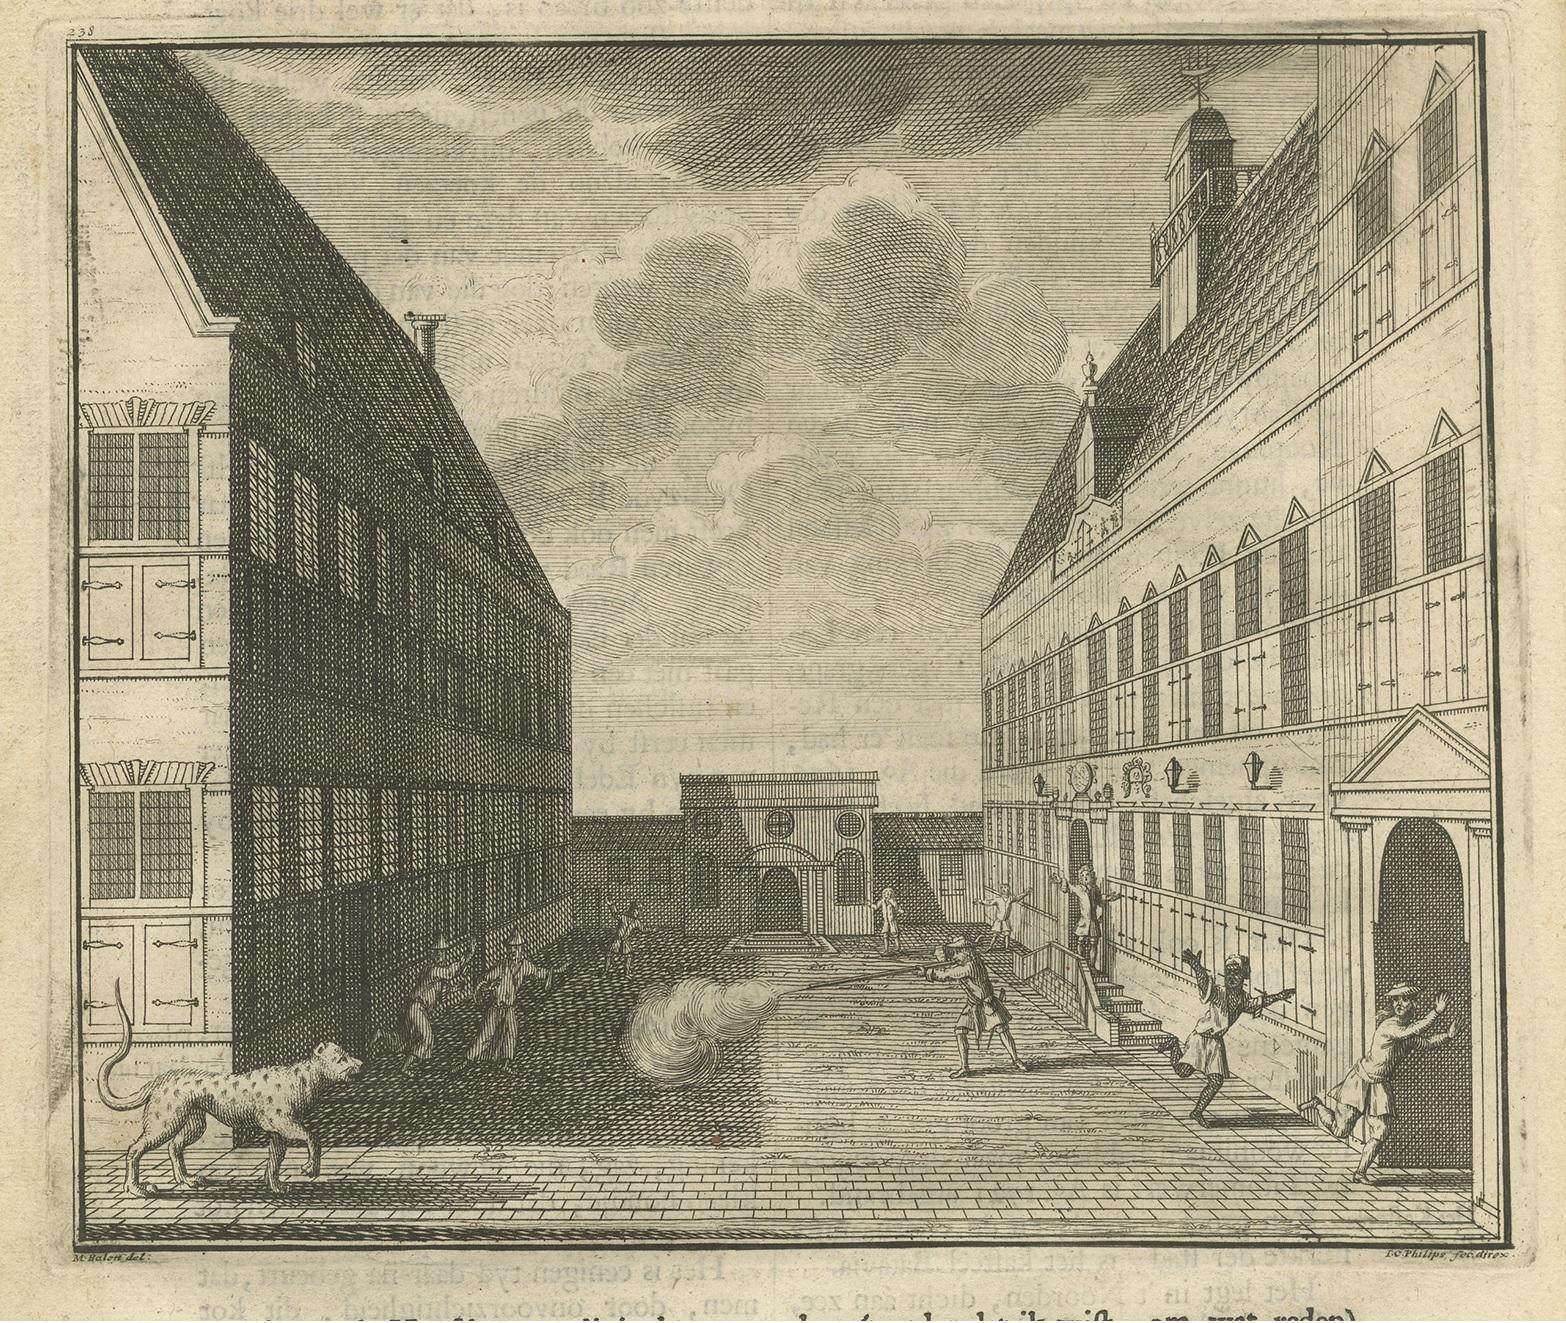 Antique print of the central court of Batavia Castle, Indonesia, a tiger or panther has entered the square. One man shoots a musket at the lion while others flee in panic. This print originates from 'Oud en Nieuw Oost-Indiën' by F. Valentijn.